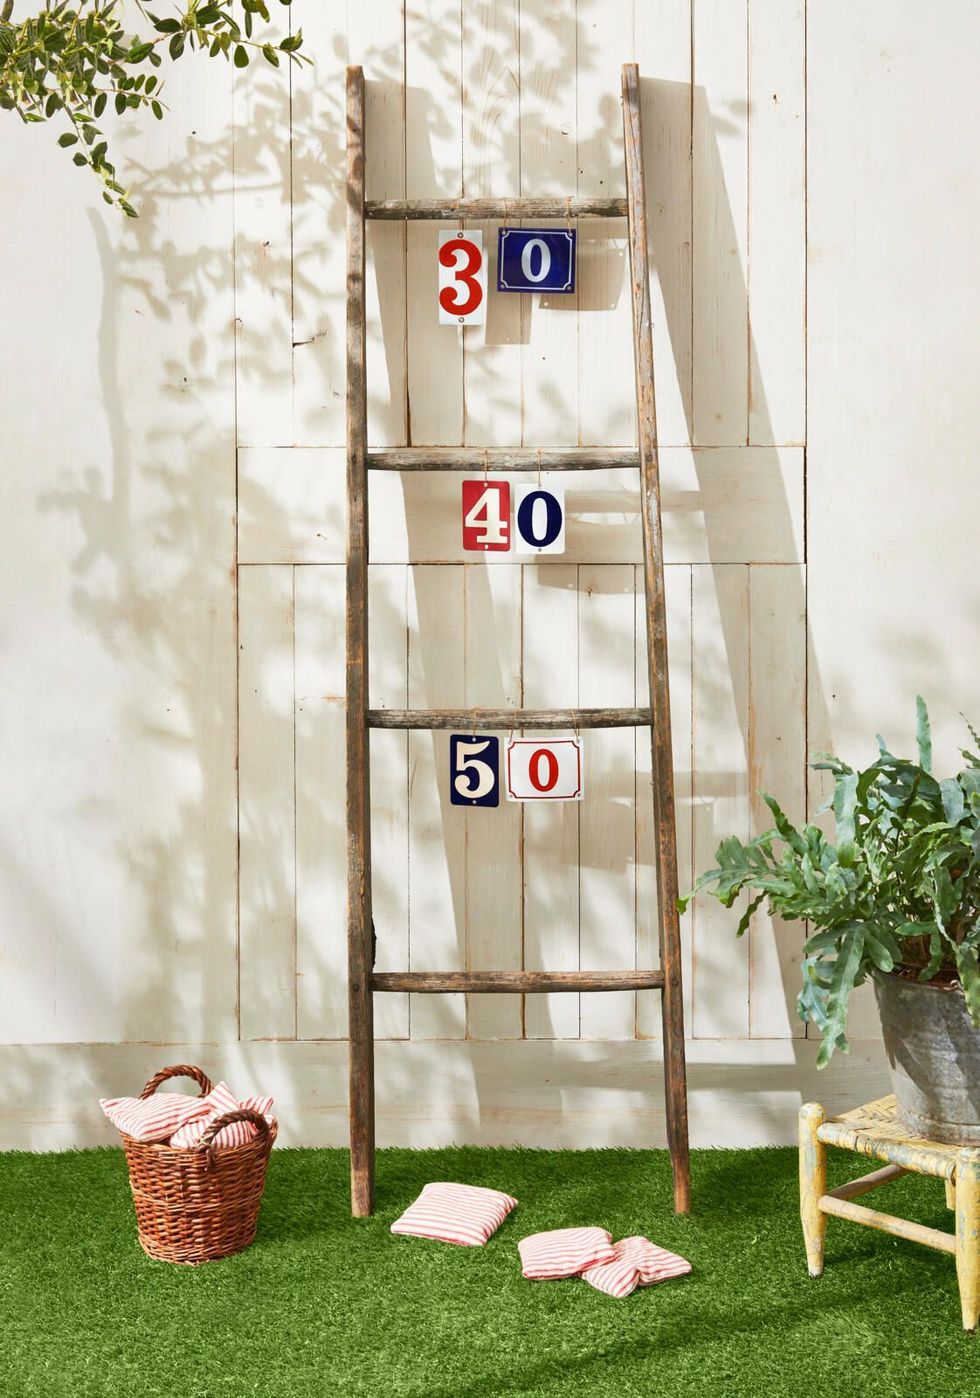 ladder toss game using vintage house numbers to assign point value